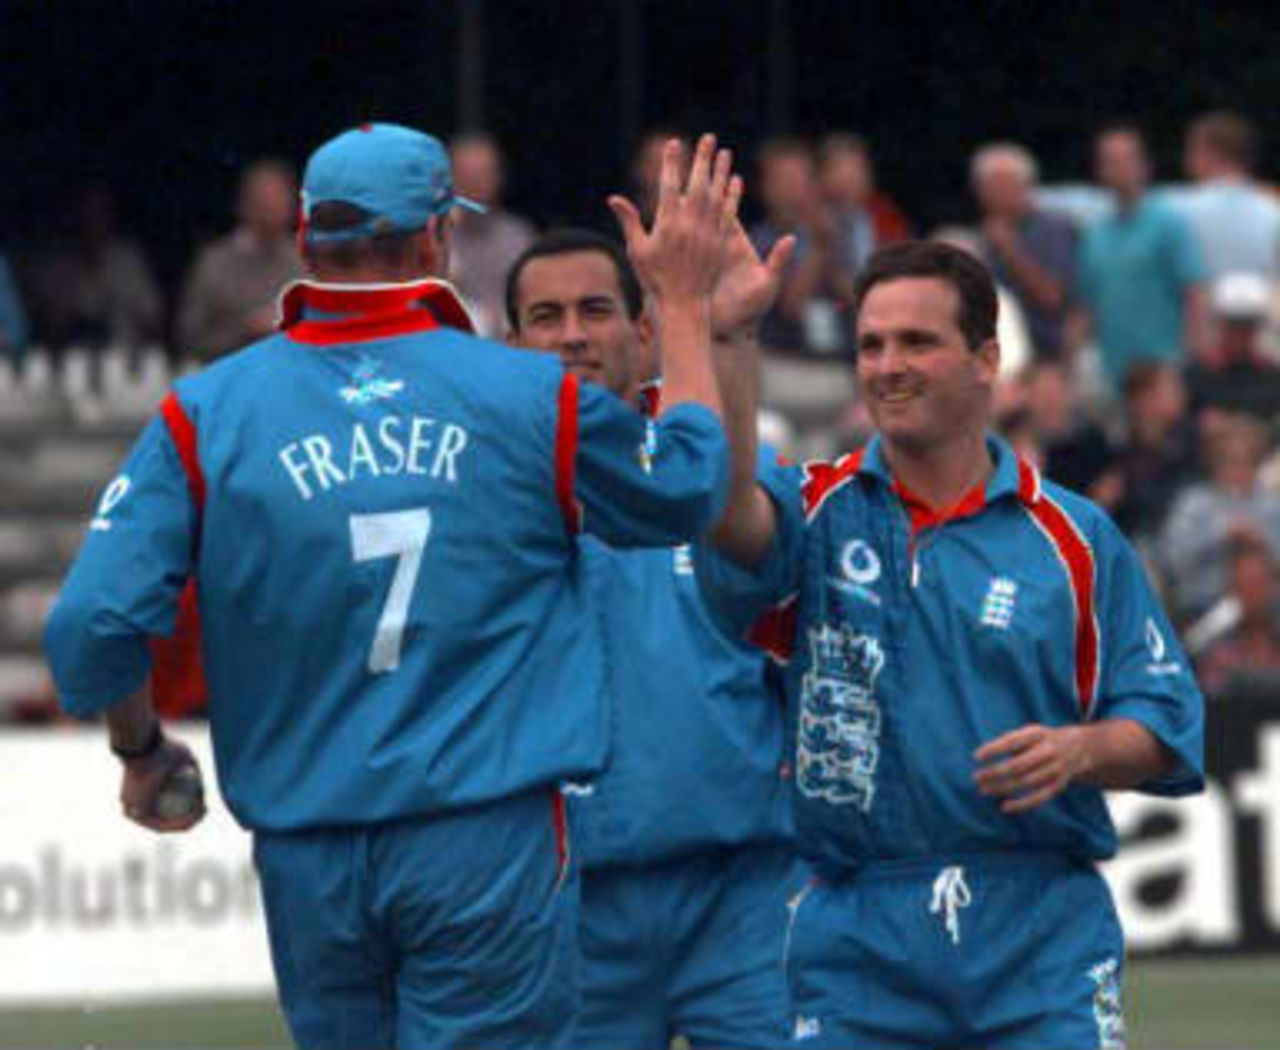 Angus Fraser high fives team mate Mark Ealham  after taking the wicket of Essex batsman  Law - World Cup warm-up match, England v Essex, Chelmsford, Essex, 09 May 1999.